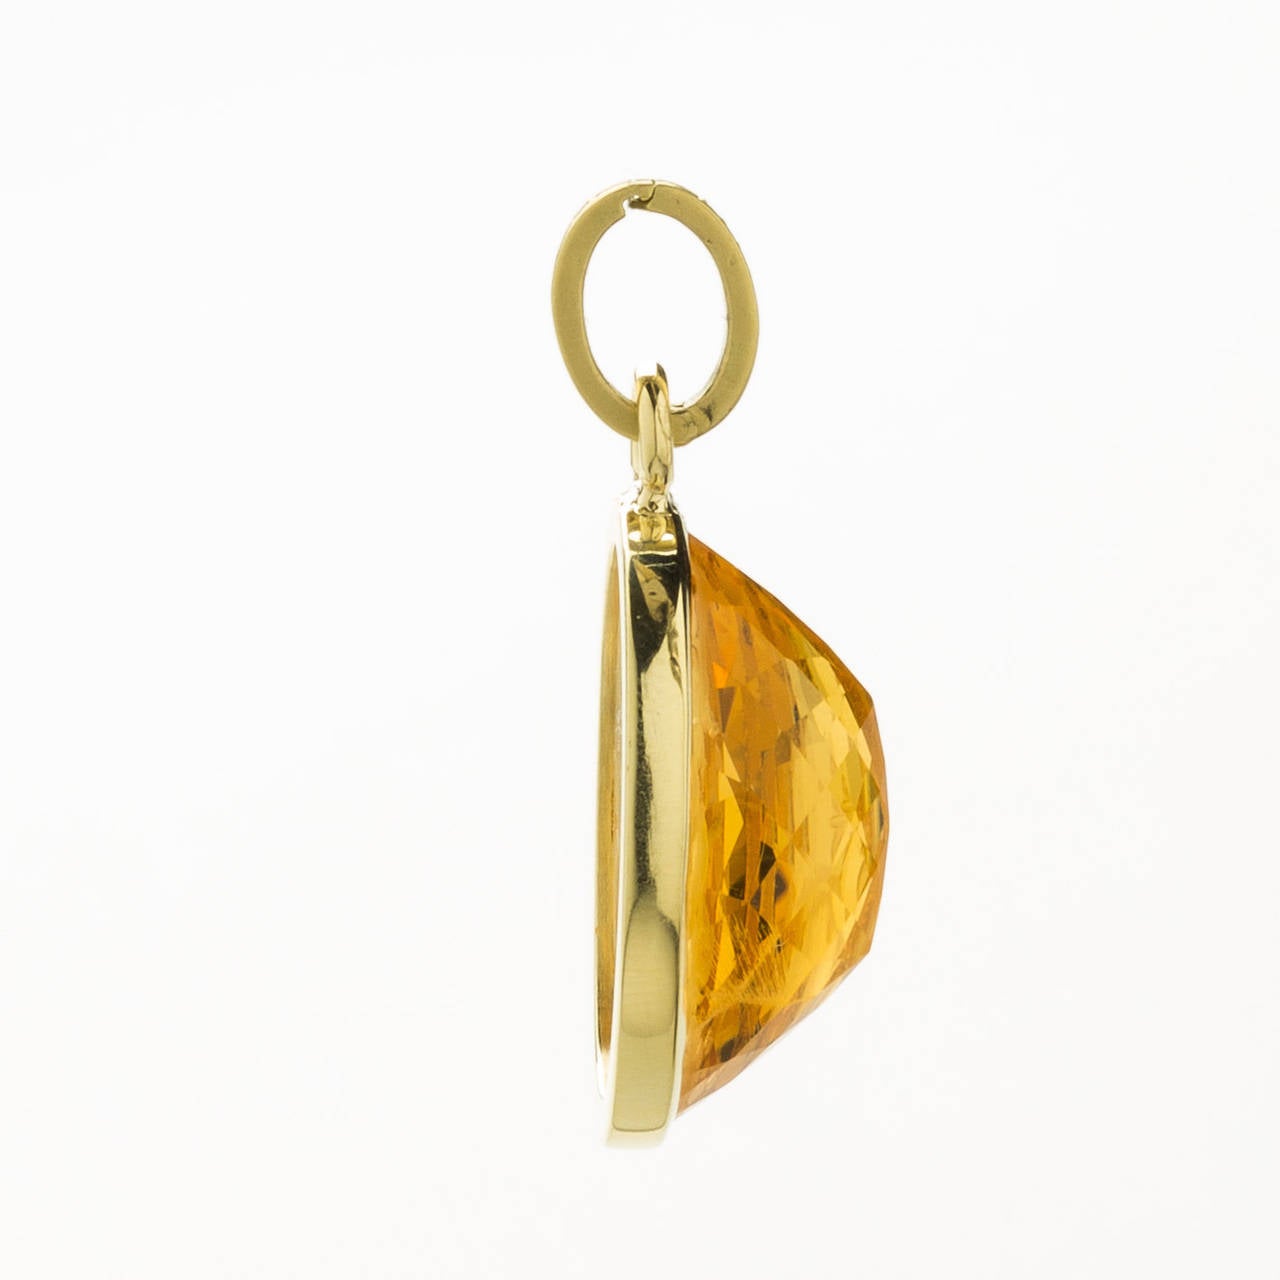 This exquisite hand carved citrine intaglio of Aphrodite created by a Master Idar-Oberstein artist. This deep faceted gemstone pendant is set in a polished 18 karat yellow gold frame with loop.  Included with a detachable hand cast 18K brushed